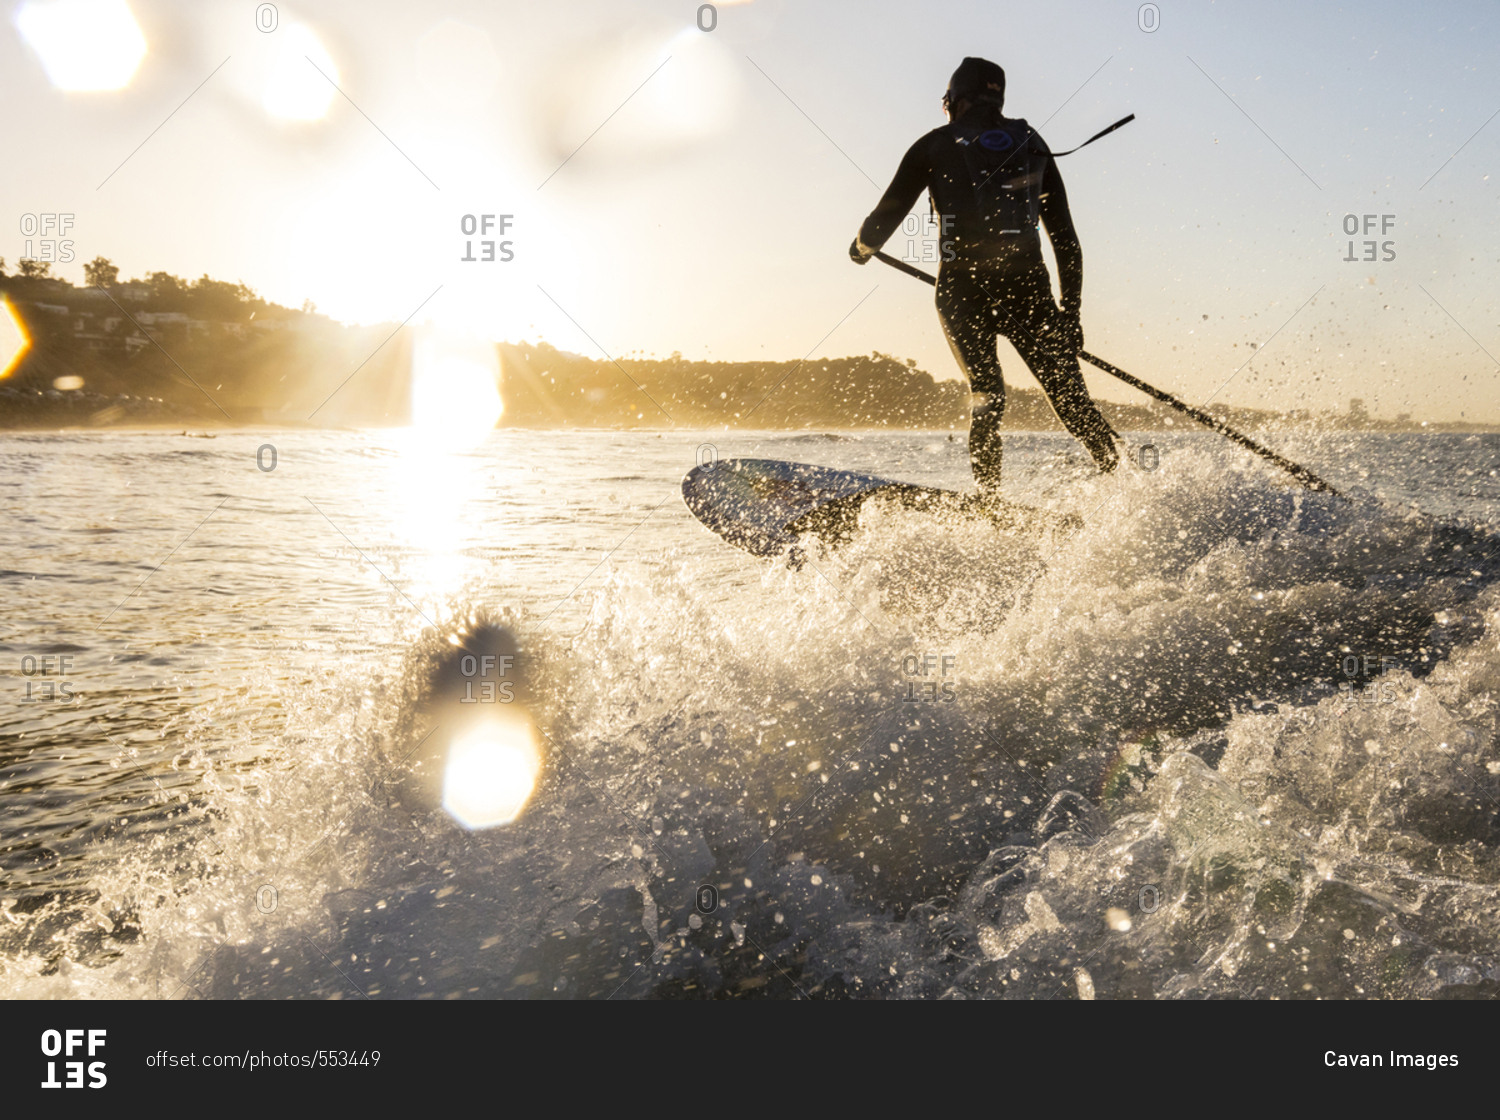 Rear view of man holding pole while surfing in sea during sunset